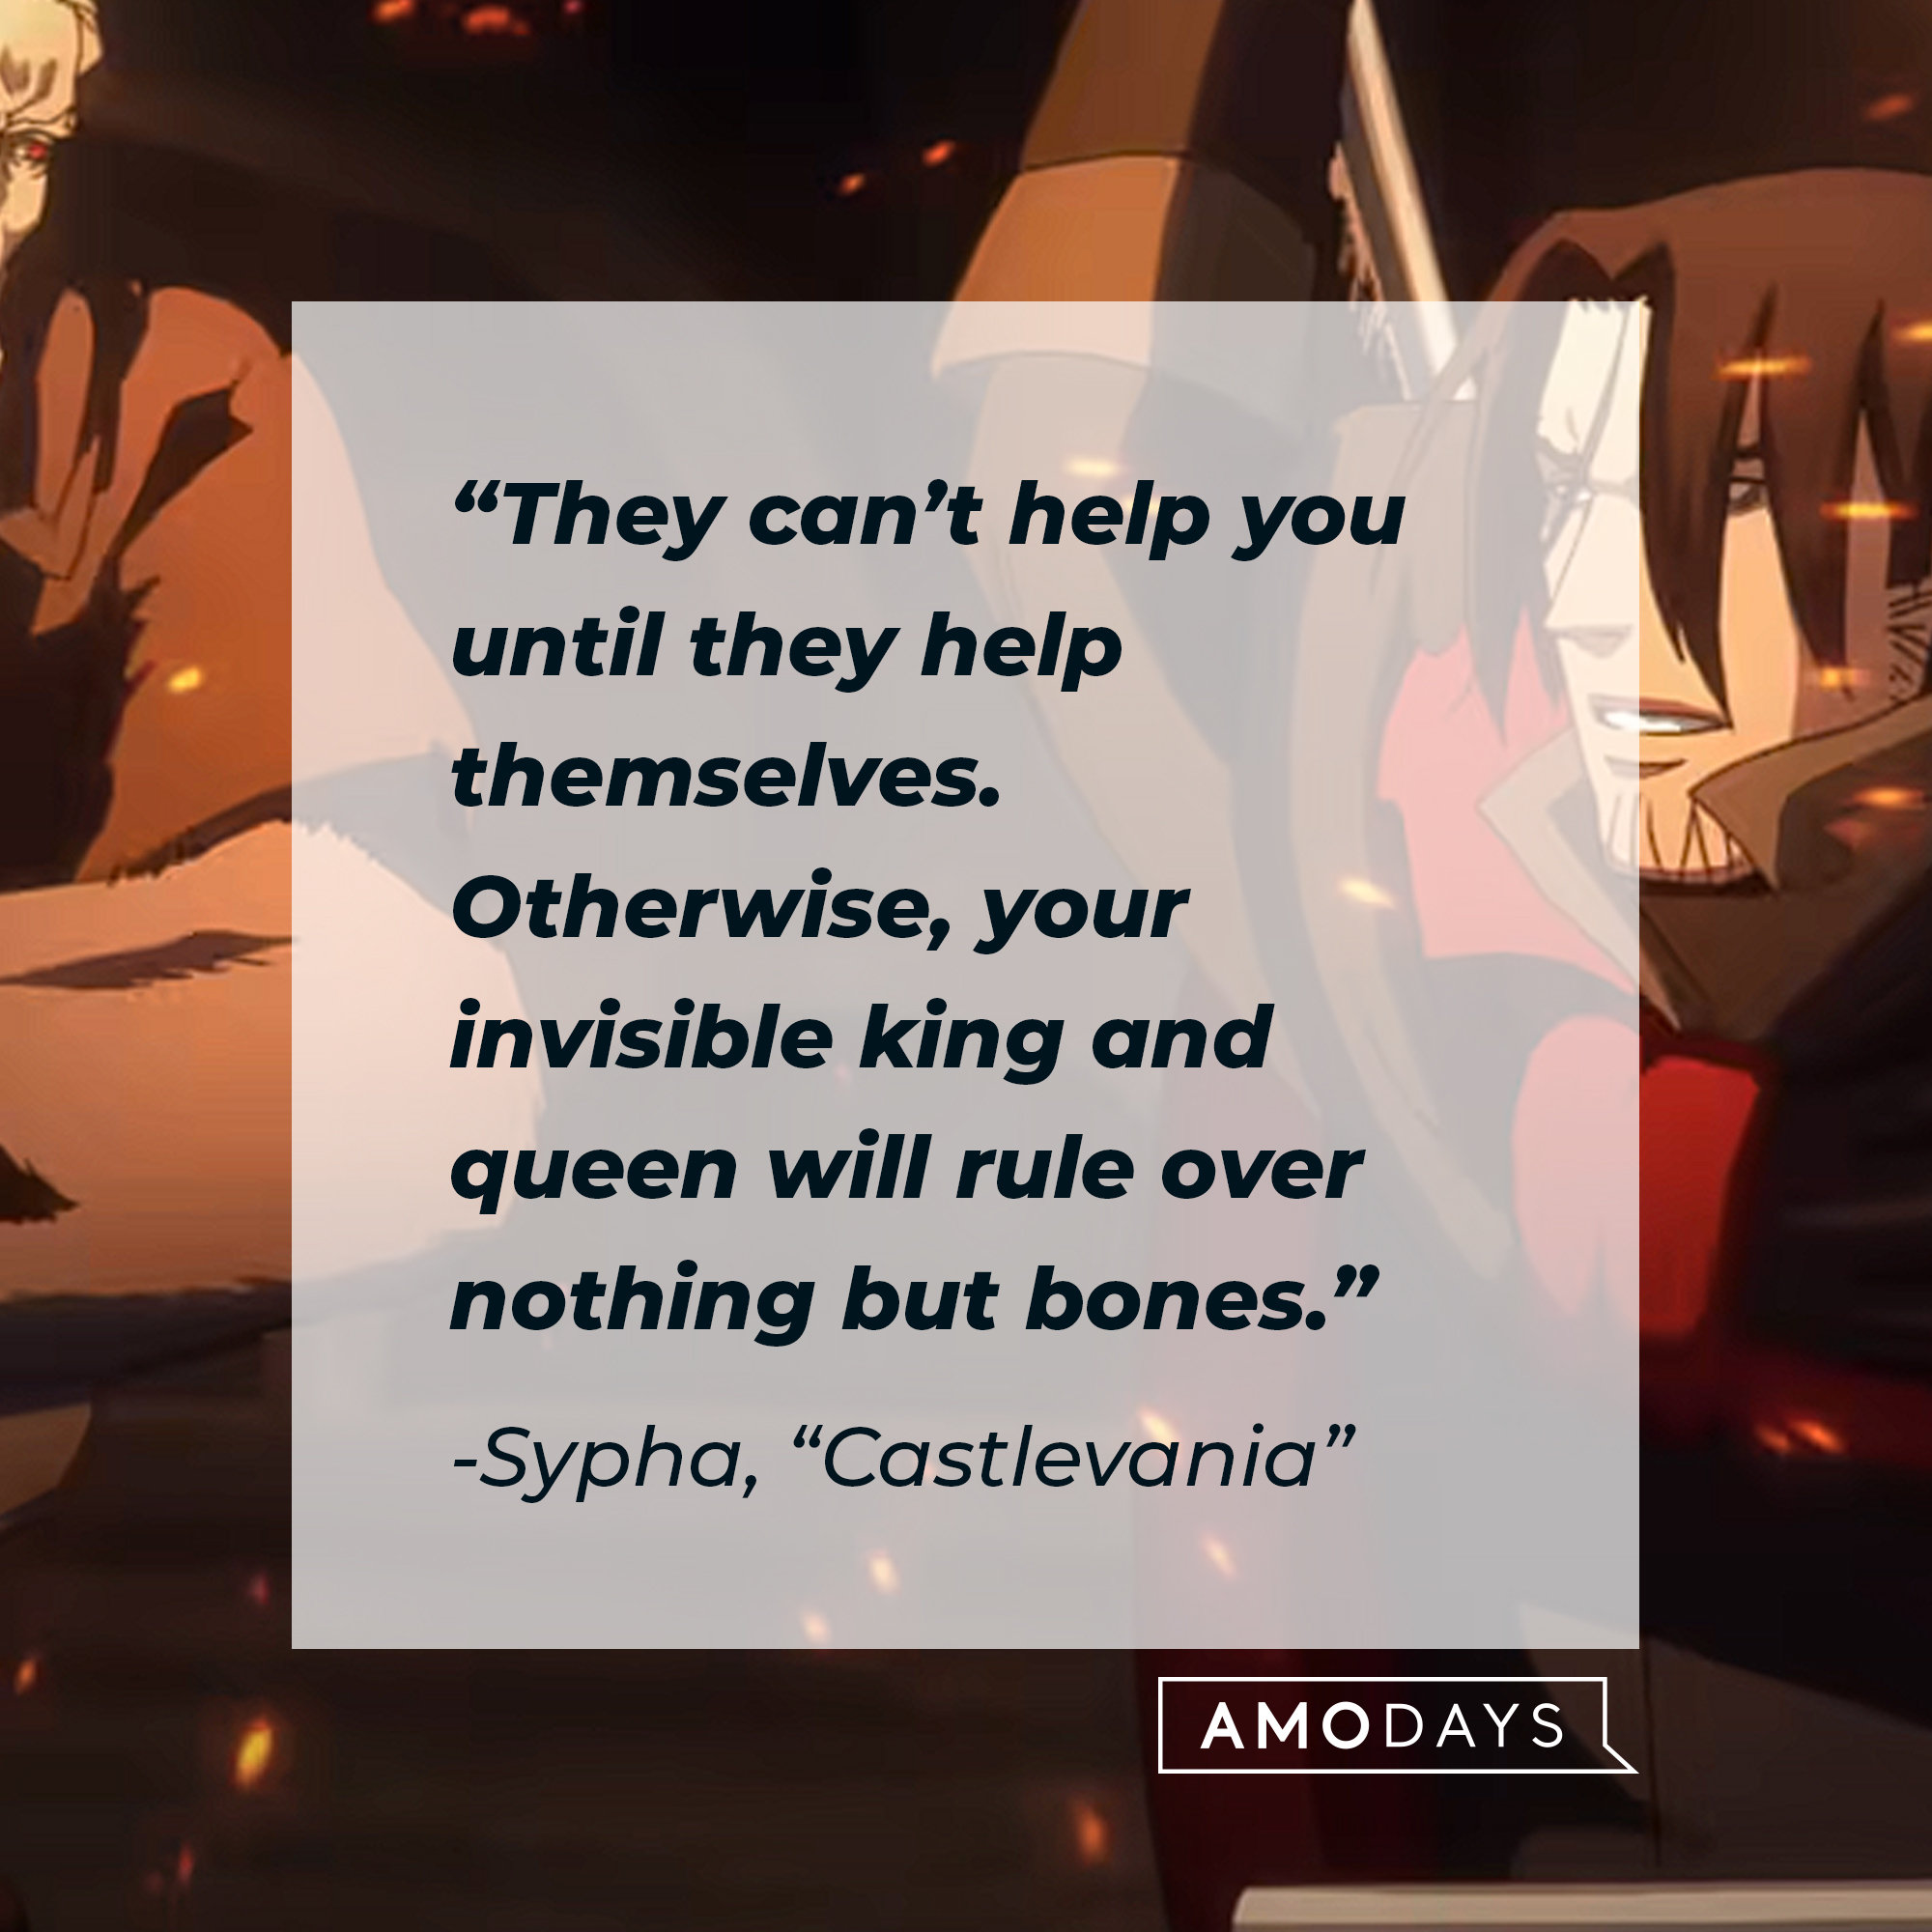 Sypha's quote from "Castlevania:" “They can’t help you until they help themselves. Otherwise, your invisible king and queen will rule over nothing but bones.” | Source: Youtube.com/Netflix